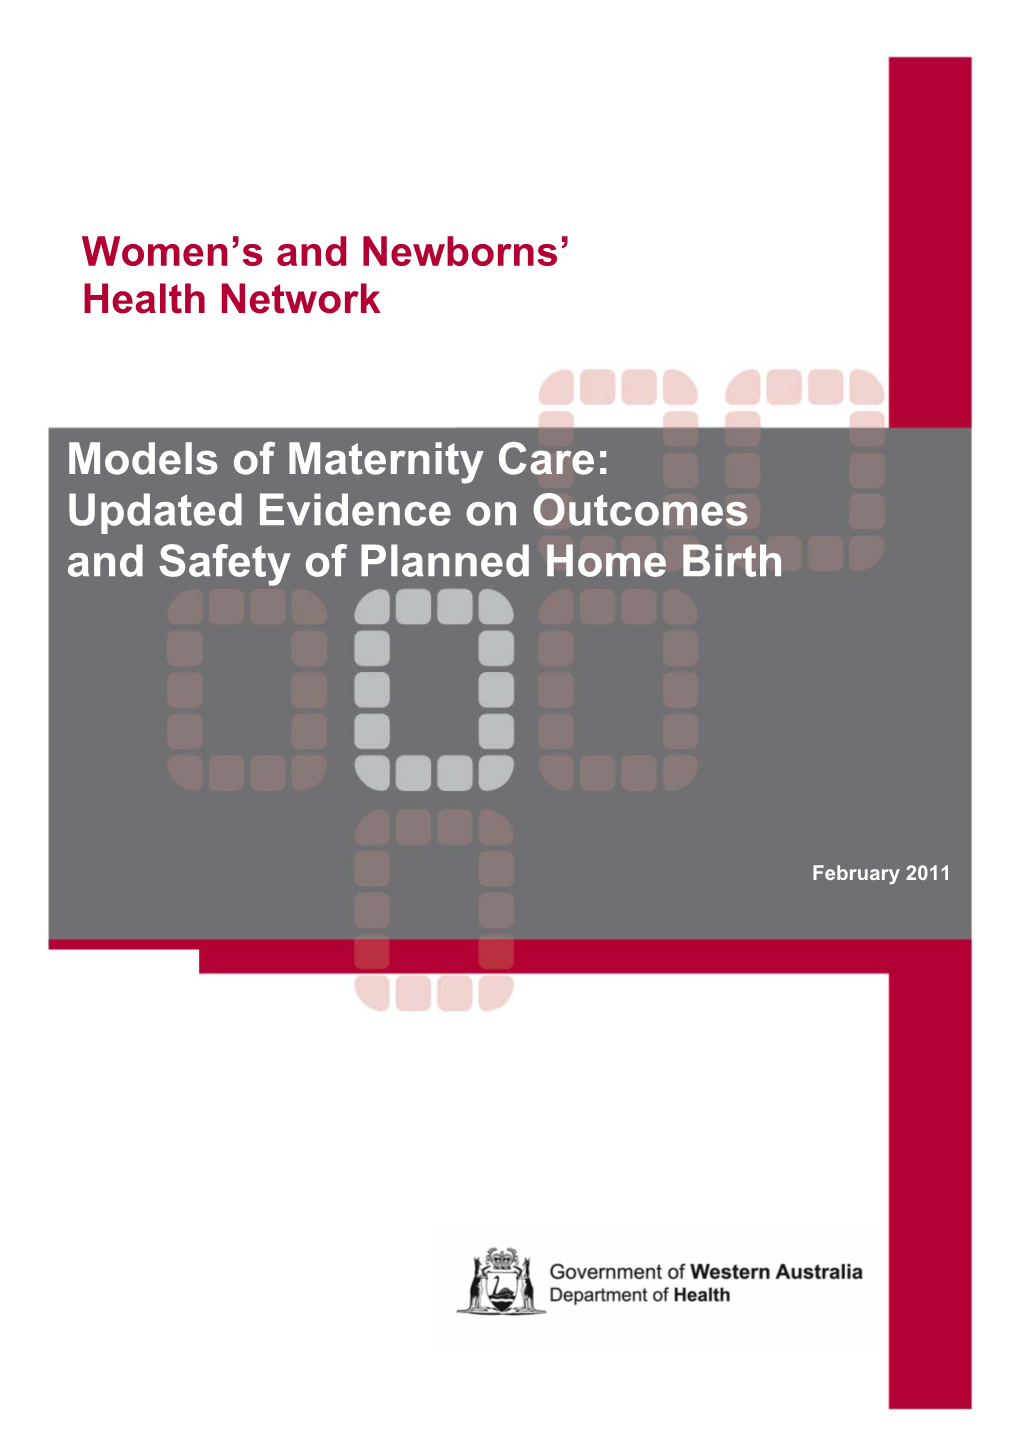 Models of Maternity Care: Updated Evidence on Outcomes and Safety of Planned Home Birth